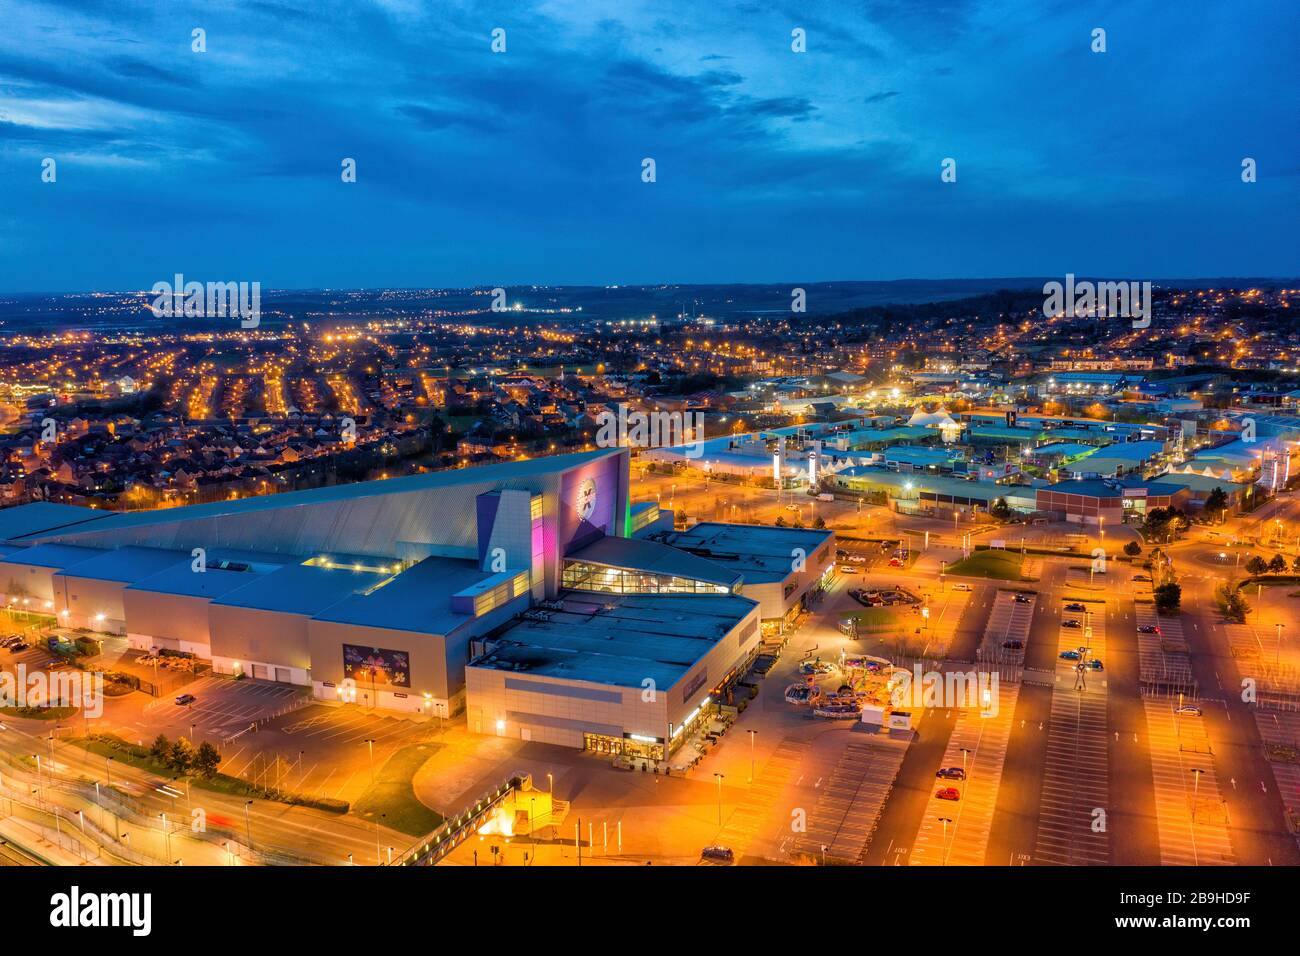 Xscape indoor ski area and leisure building Castleford West Yorkshire close to junction 32 and the retail outlet, aerial photograph at dusk Stock Photo